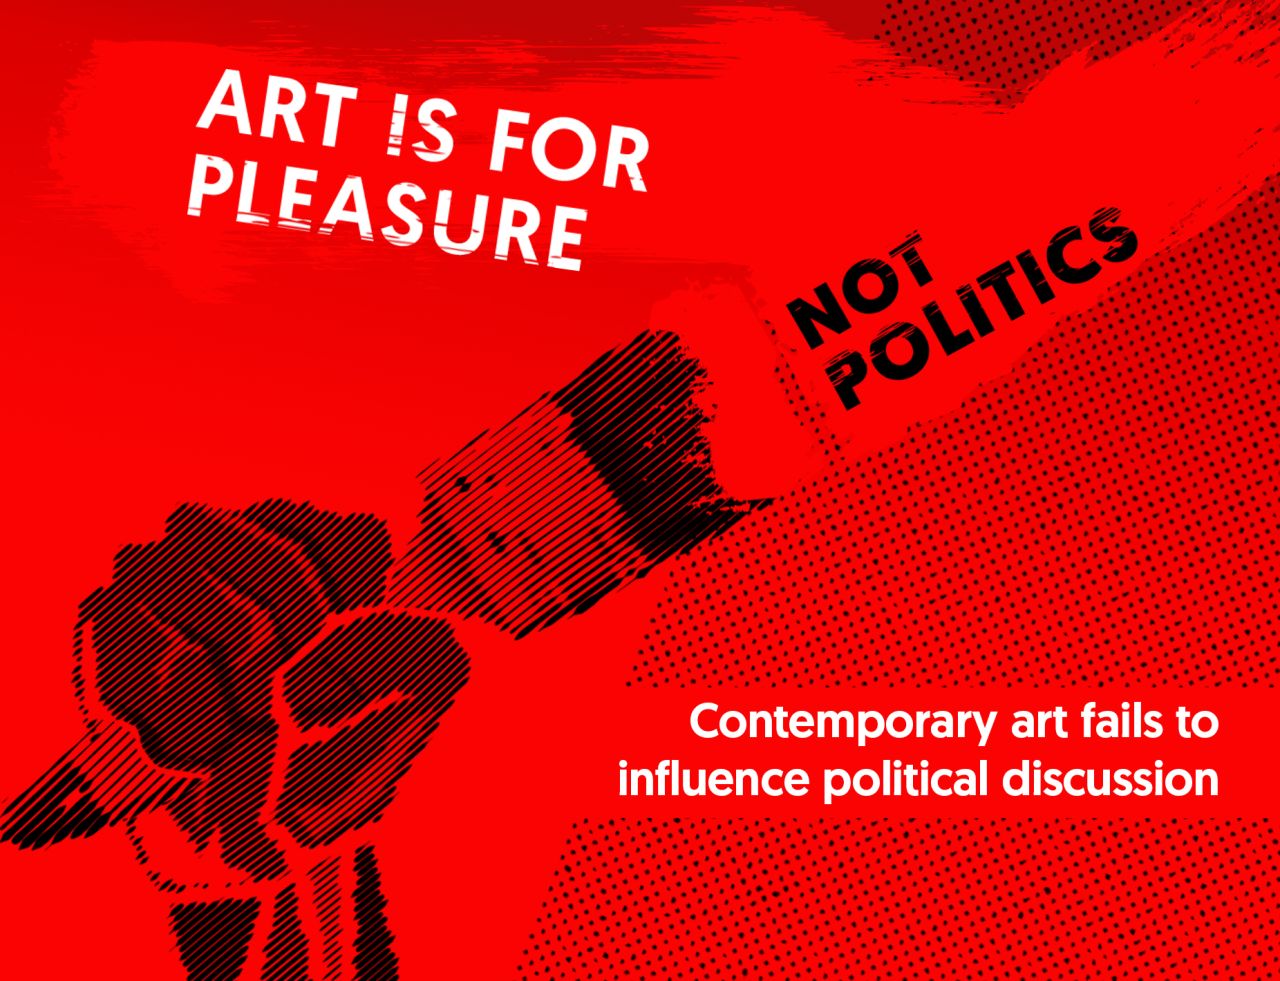 The Intelligence Squared panel will address the topic: "Art is for pleasure not politics: Contemporary art fails to influence political discussion."